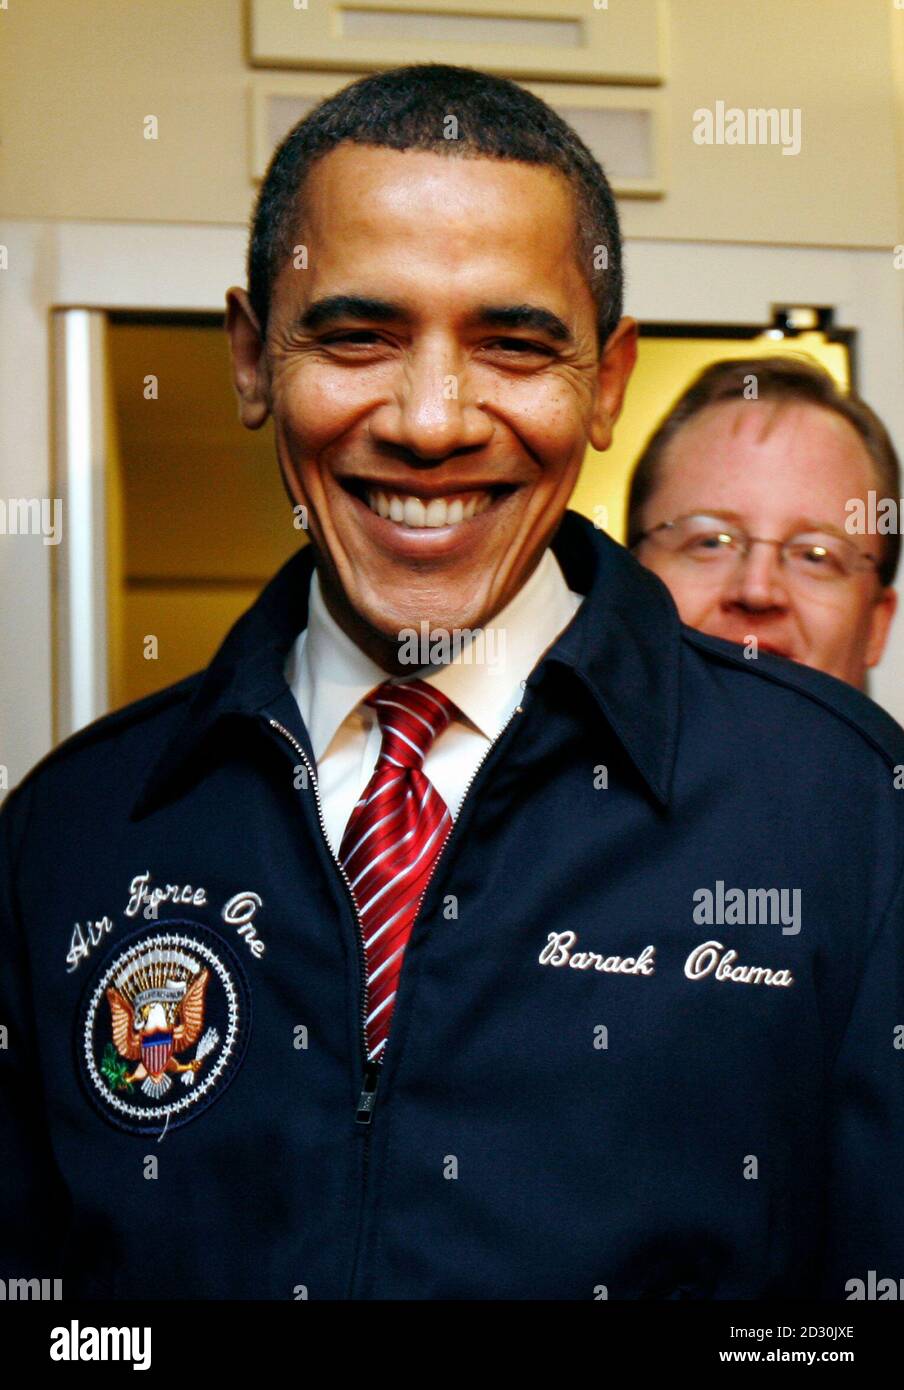 U.S. President Barack Obama sports his new Air Force jacket with his name  upon it as he speaks to reporters during his first flight aboard Air Force  One February 5, 2009. Obama